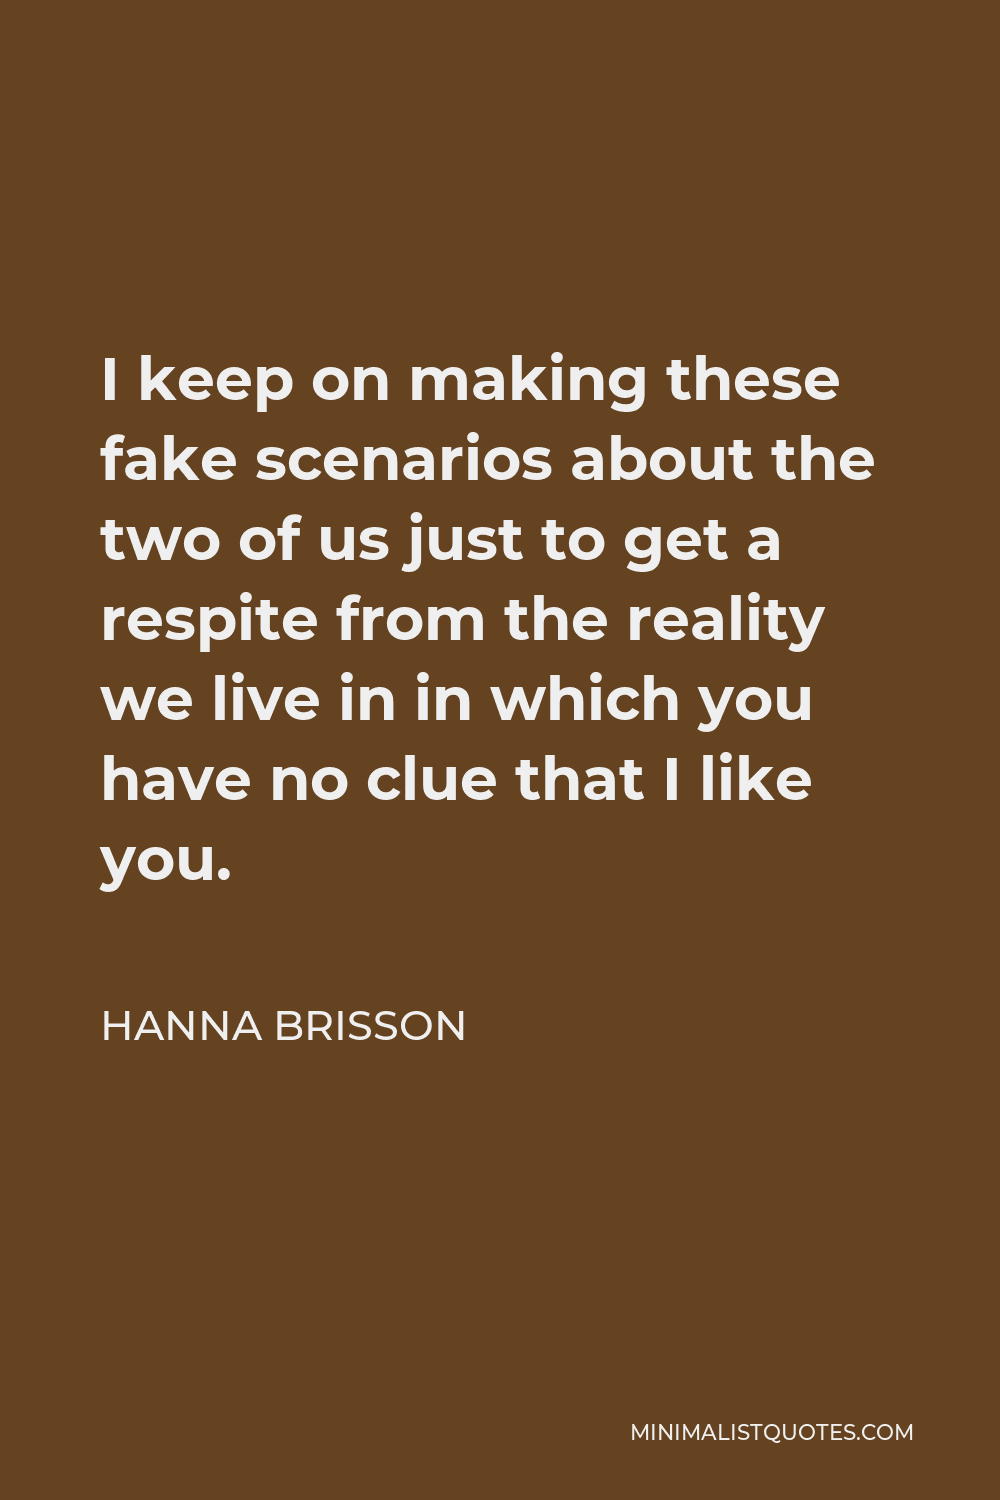 Hanna Brisson Quote - I keep on making these fake scenarios about the two of us just to get a respite from the reality we live in in which you have no clue that I like you.